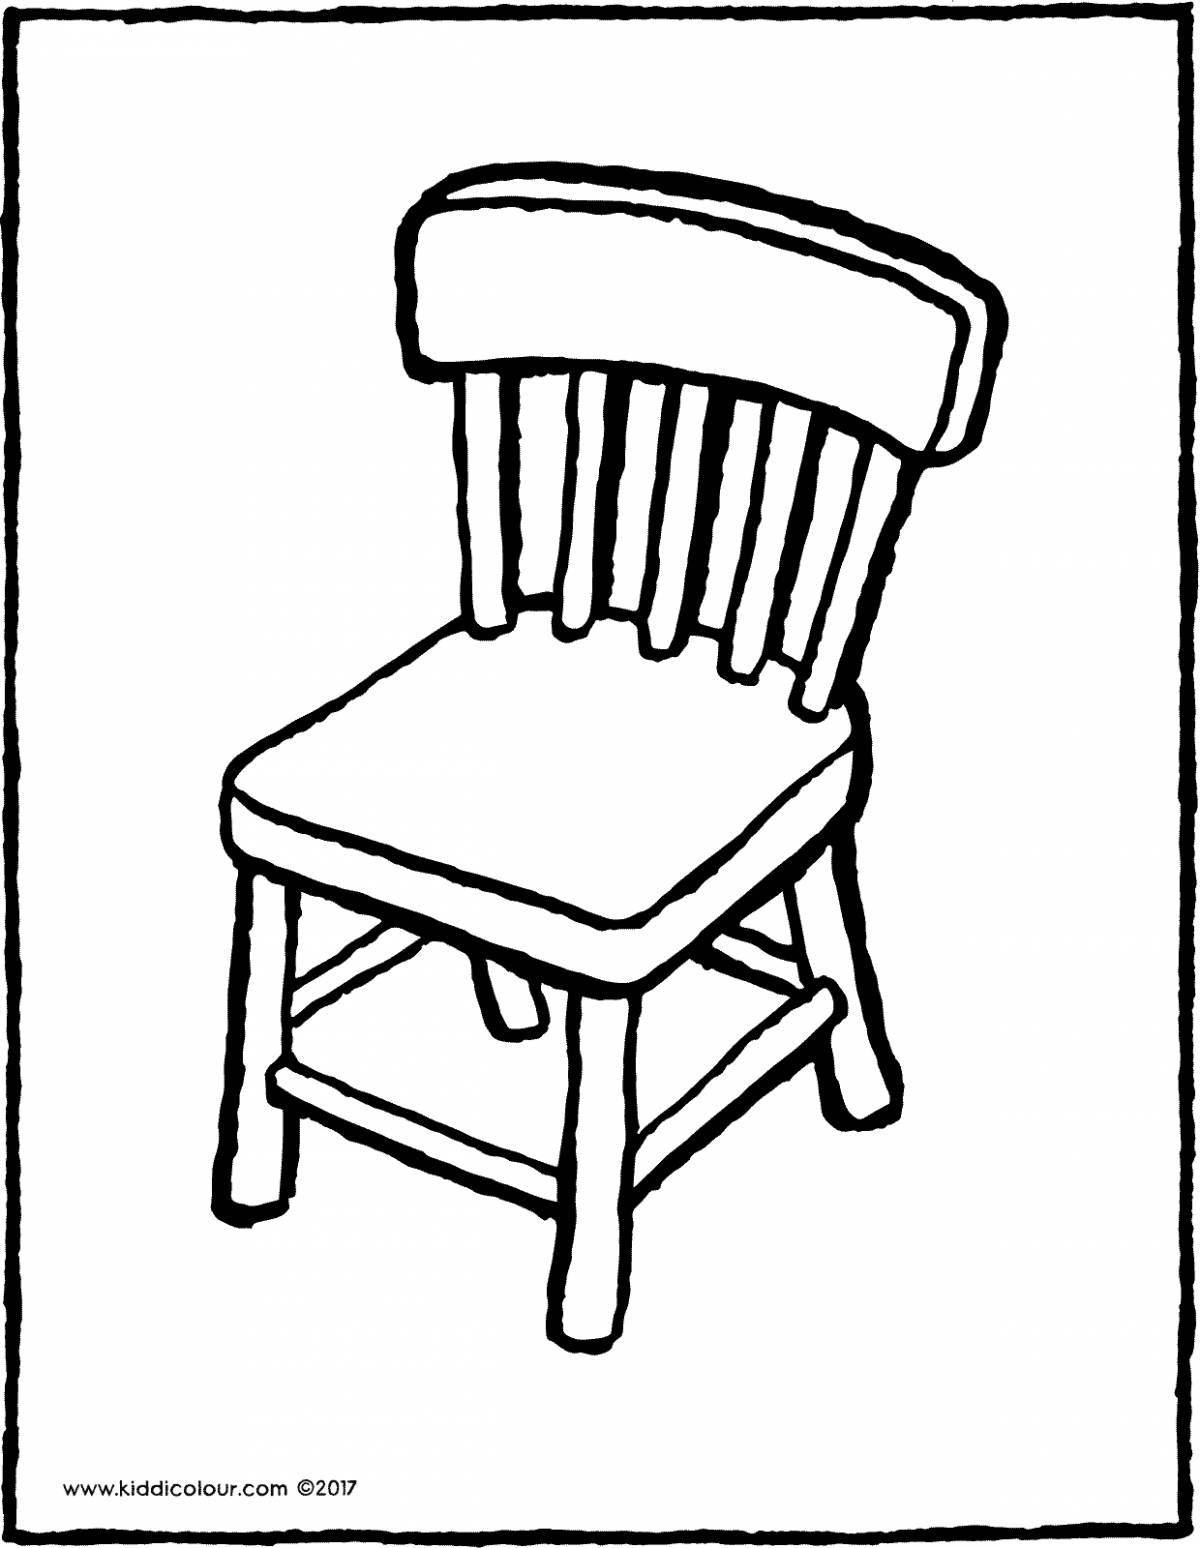 Complex chair coloring page